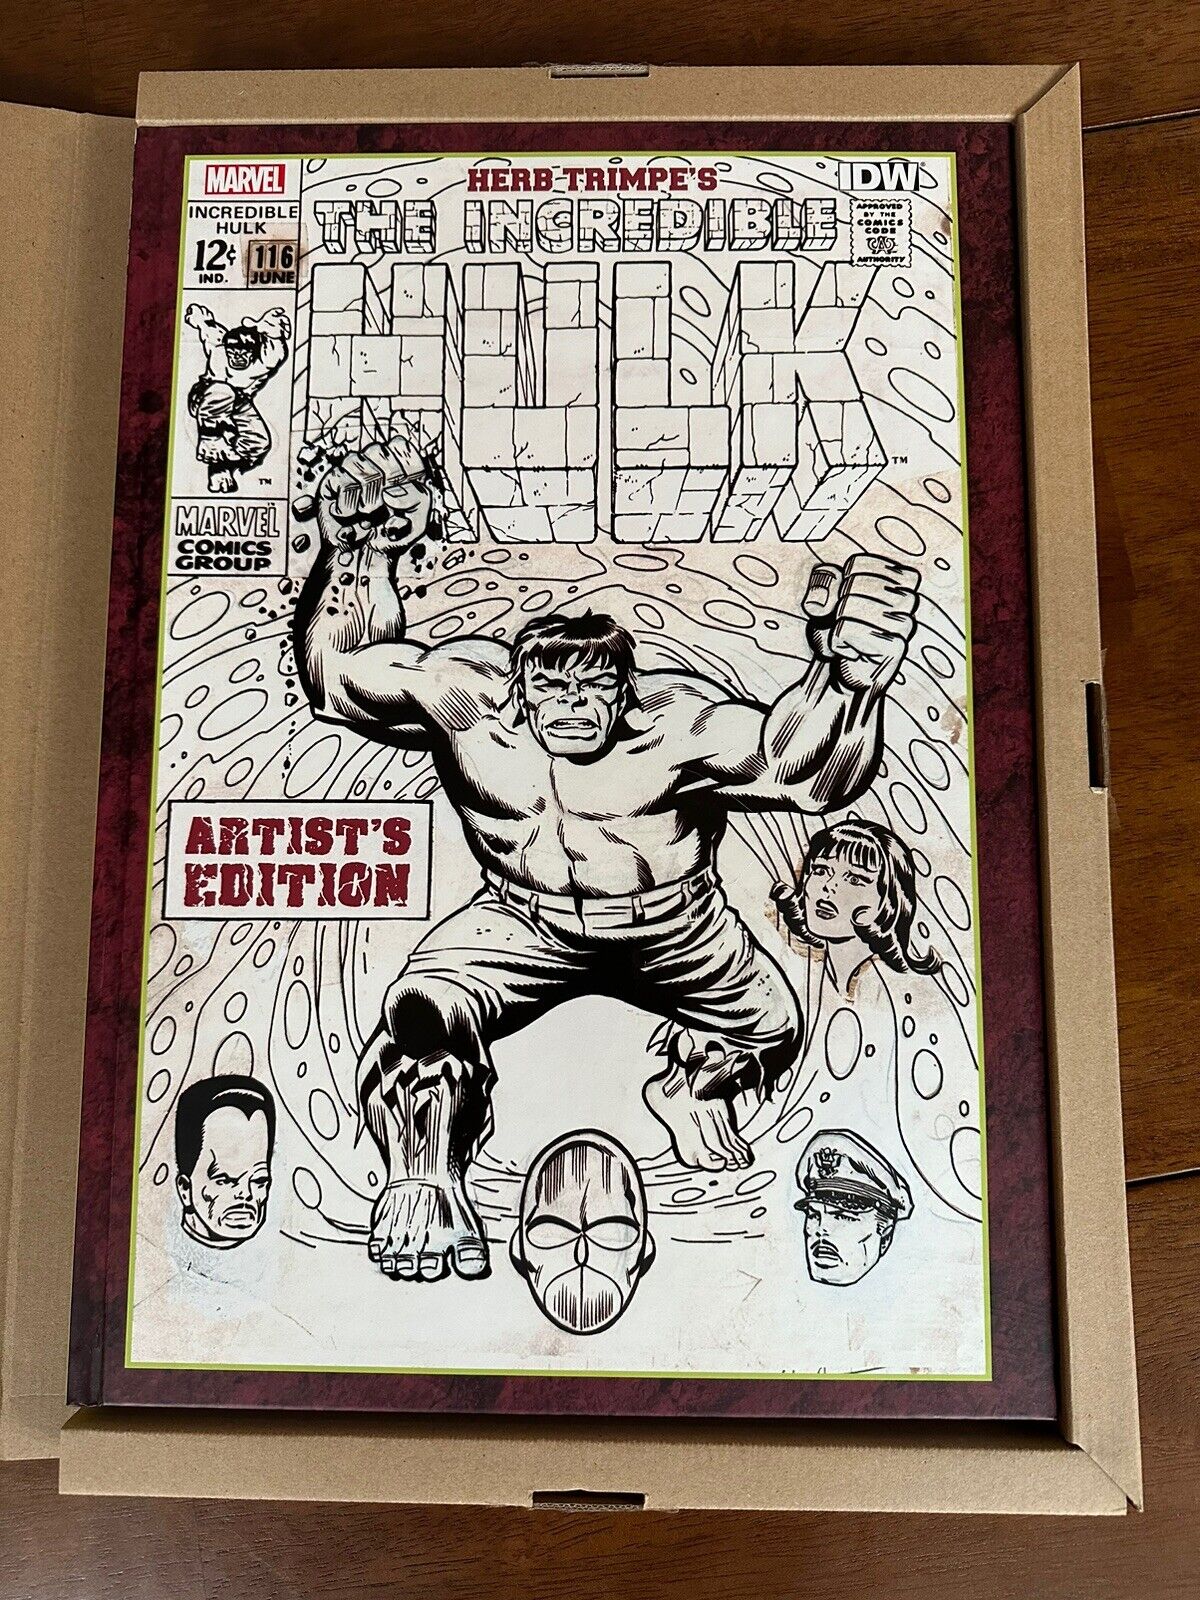 Herb Trimpe's Incredible Hulk Artist's Edition HC IDW New Sealed Marvel